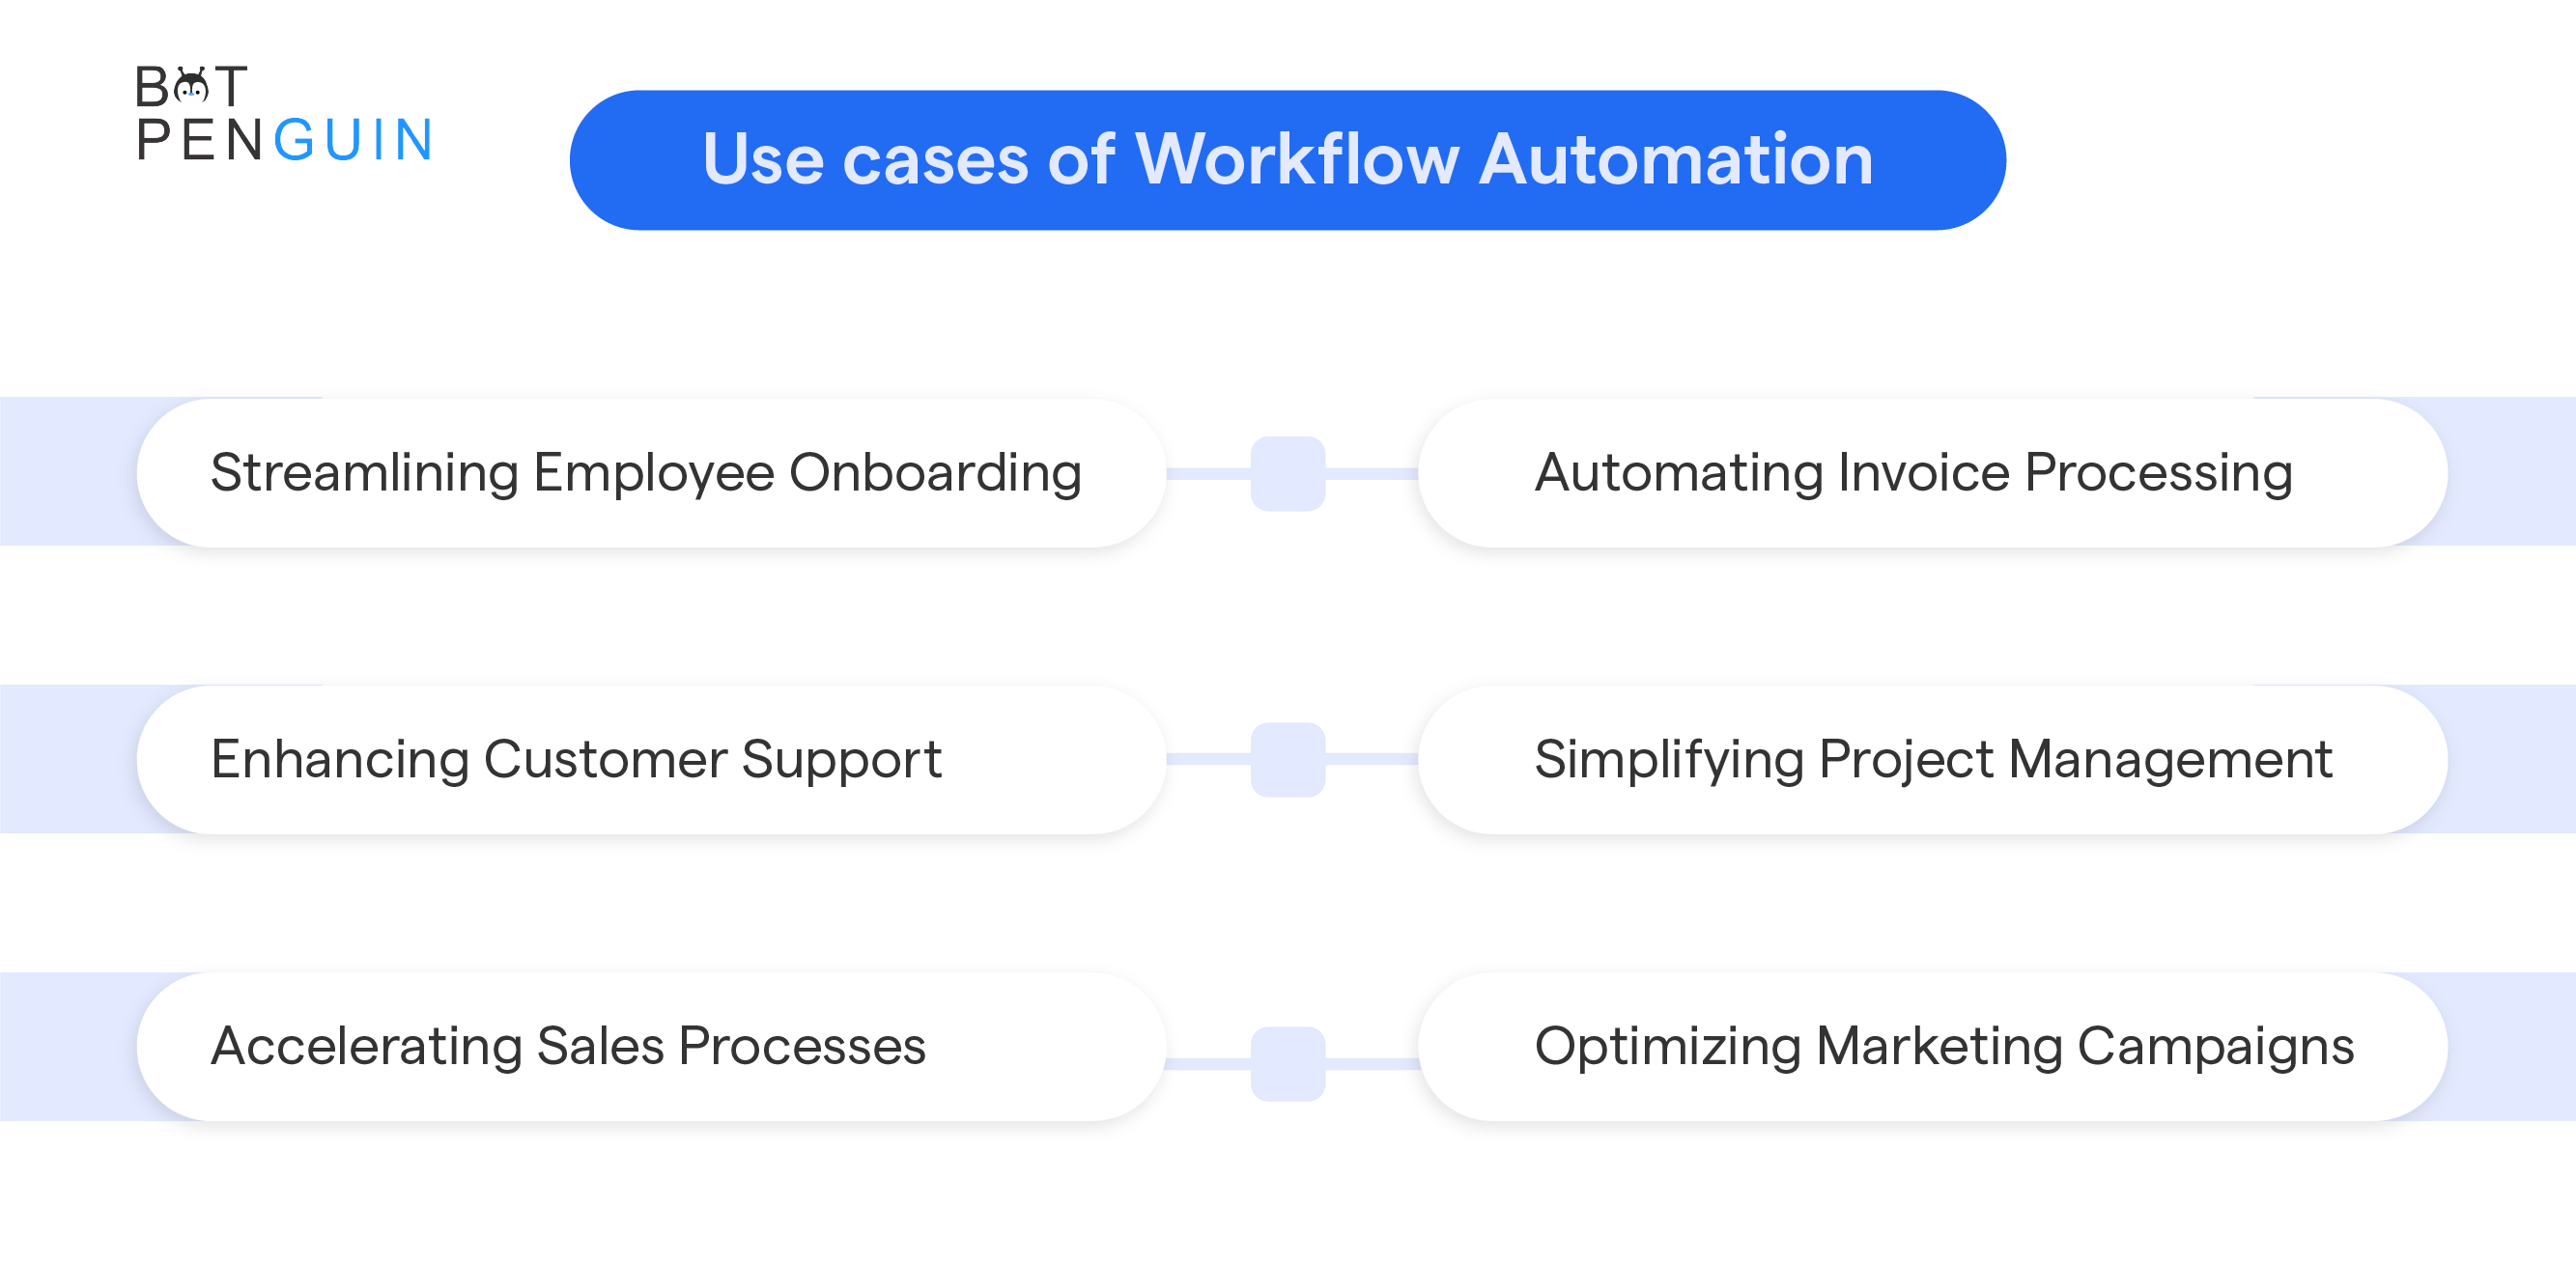 Use cases of Workflow Automation.